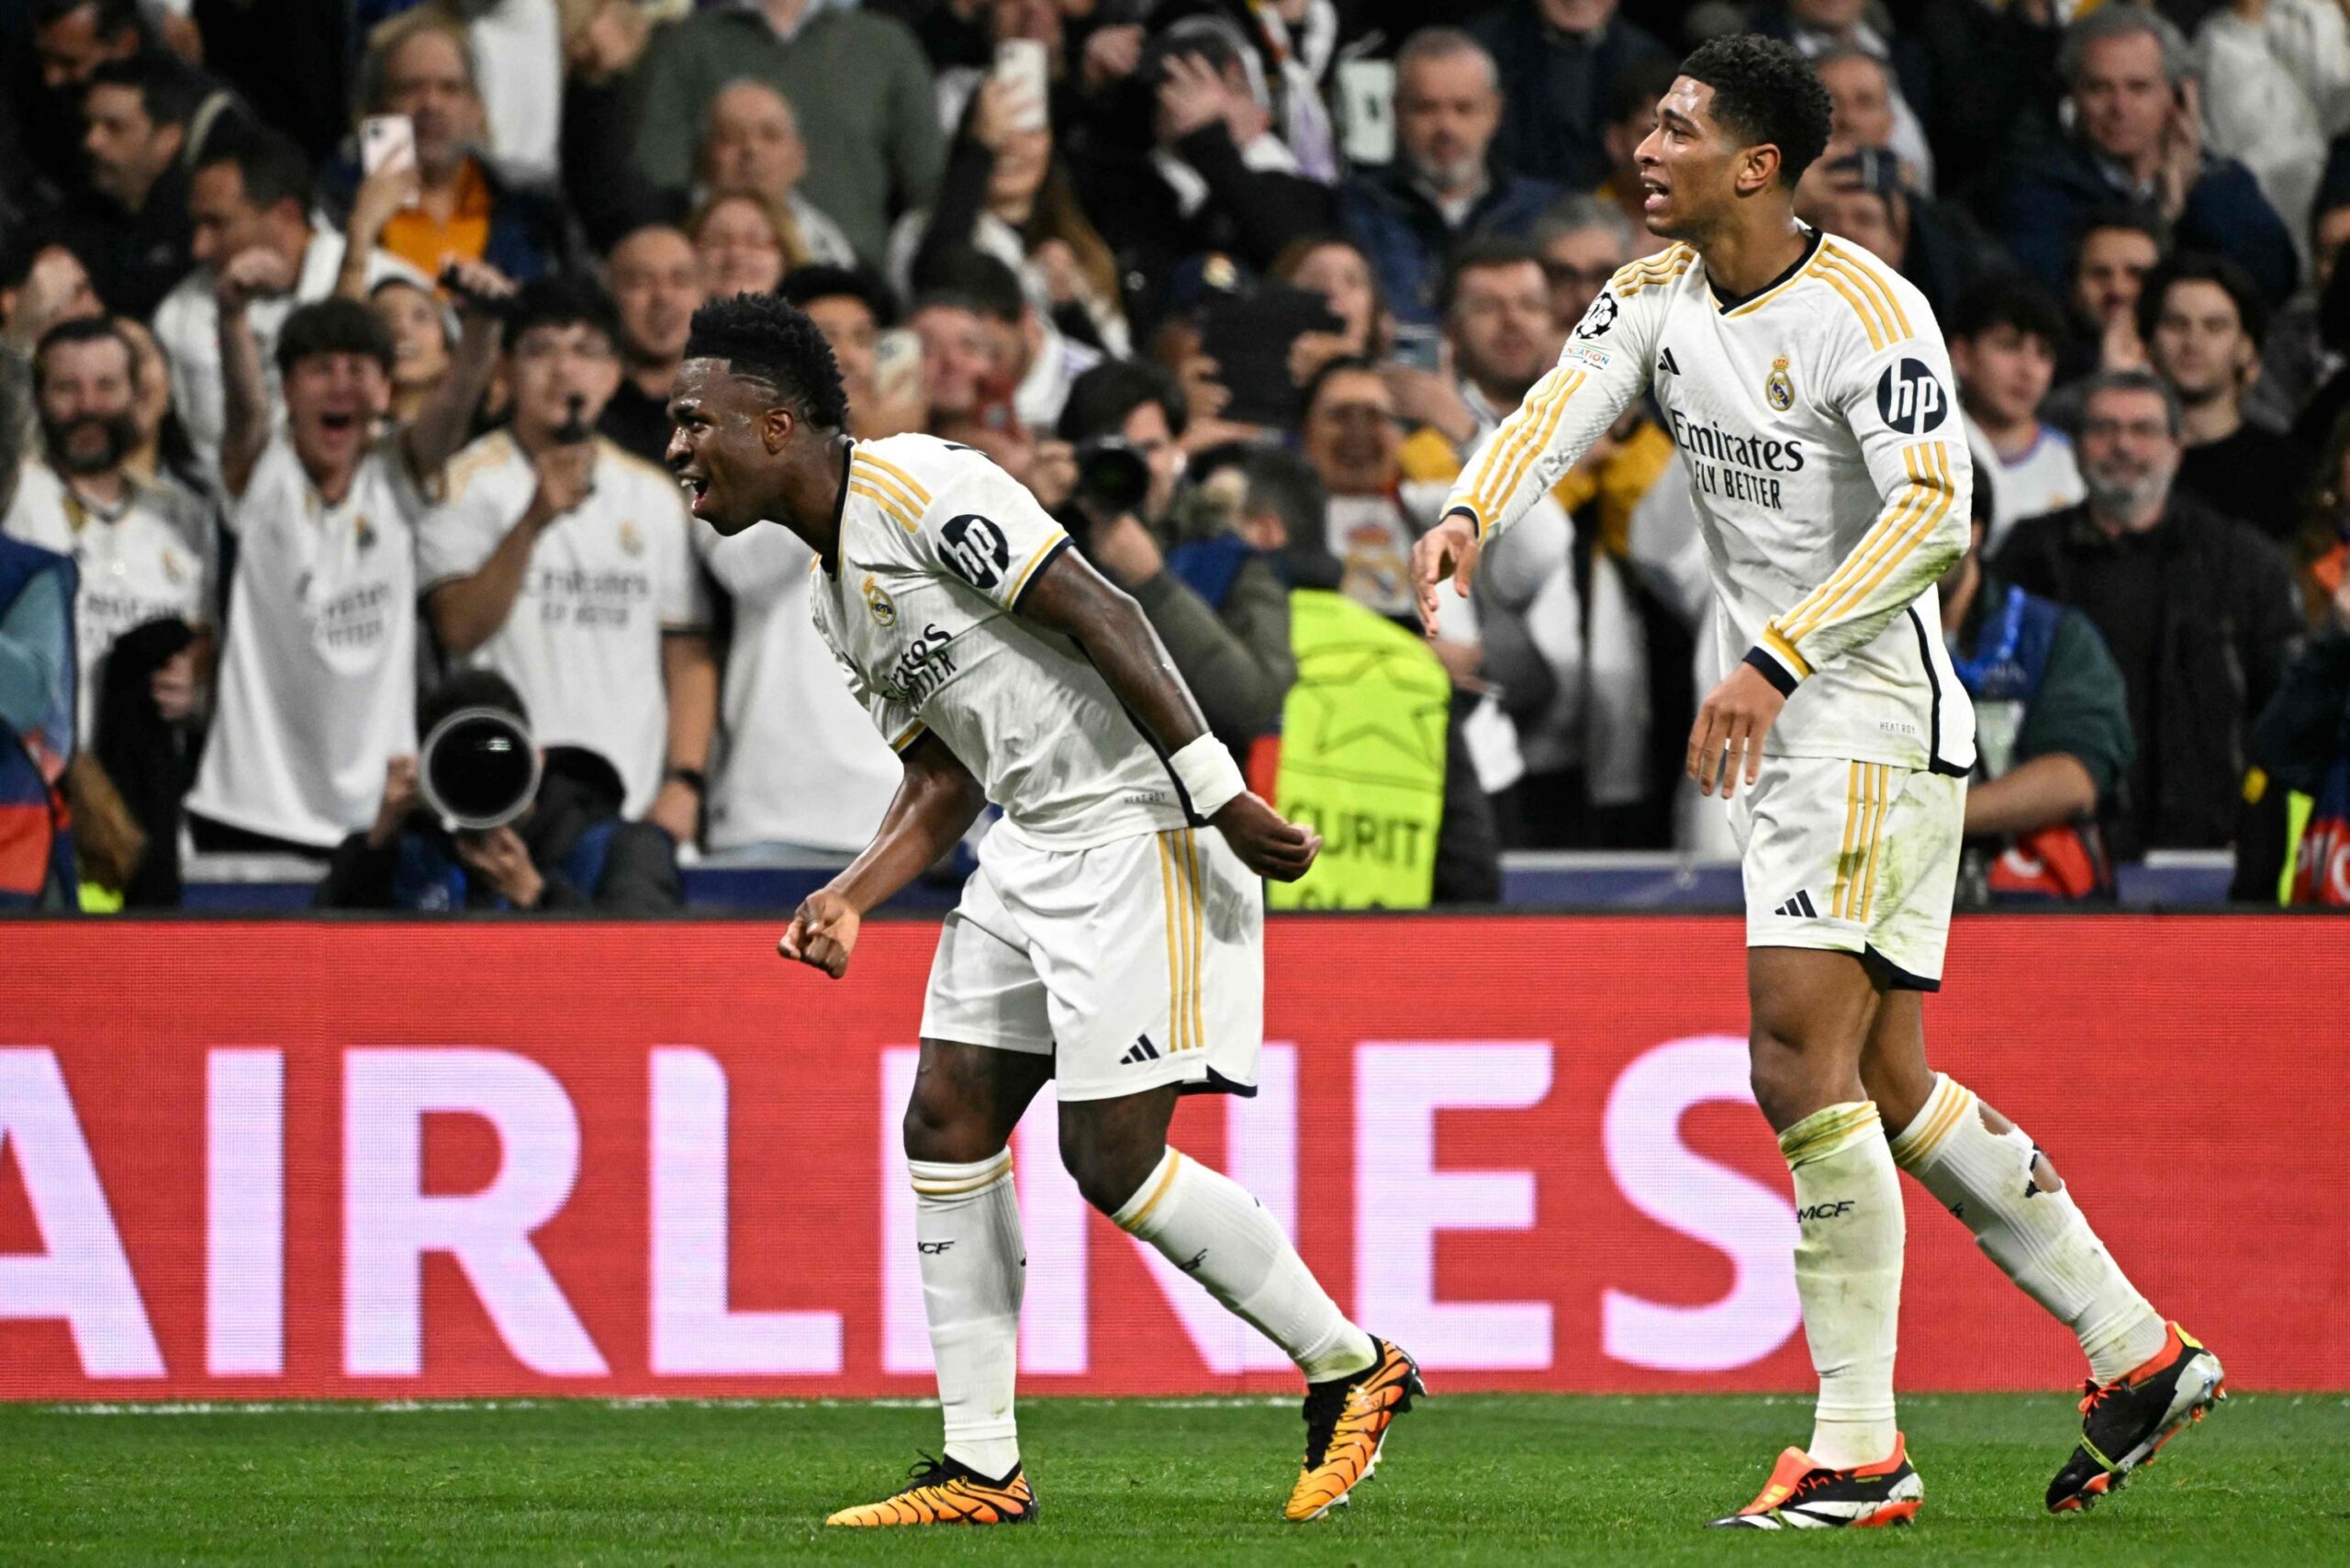 Real Madrid's Champions League Journey: A Night to Remember at the Santiago Bernabeu